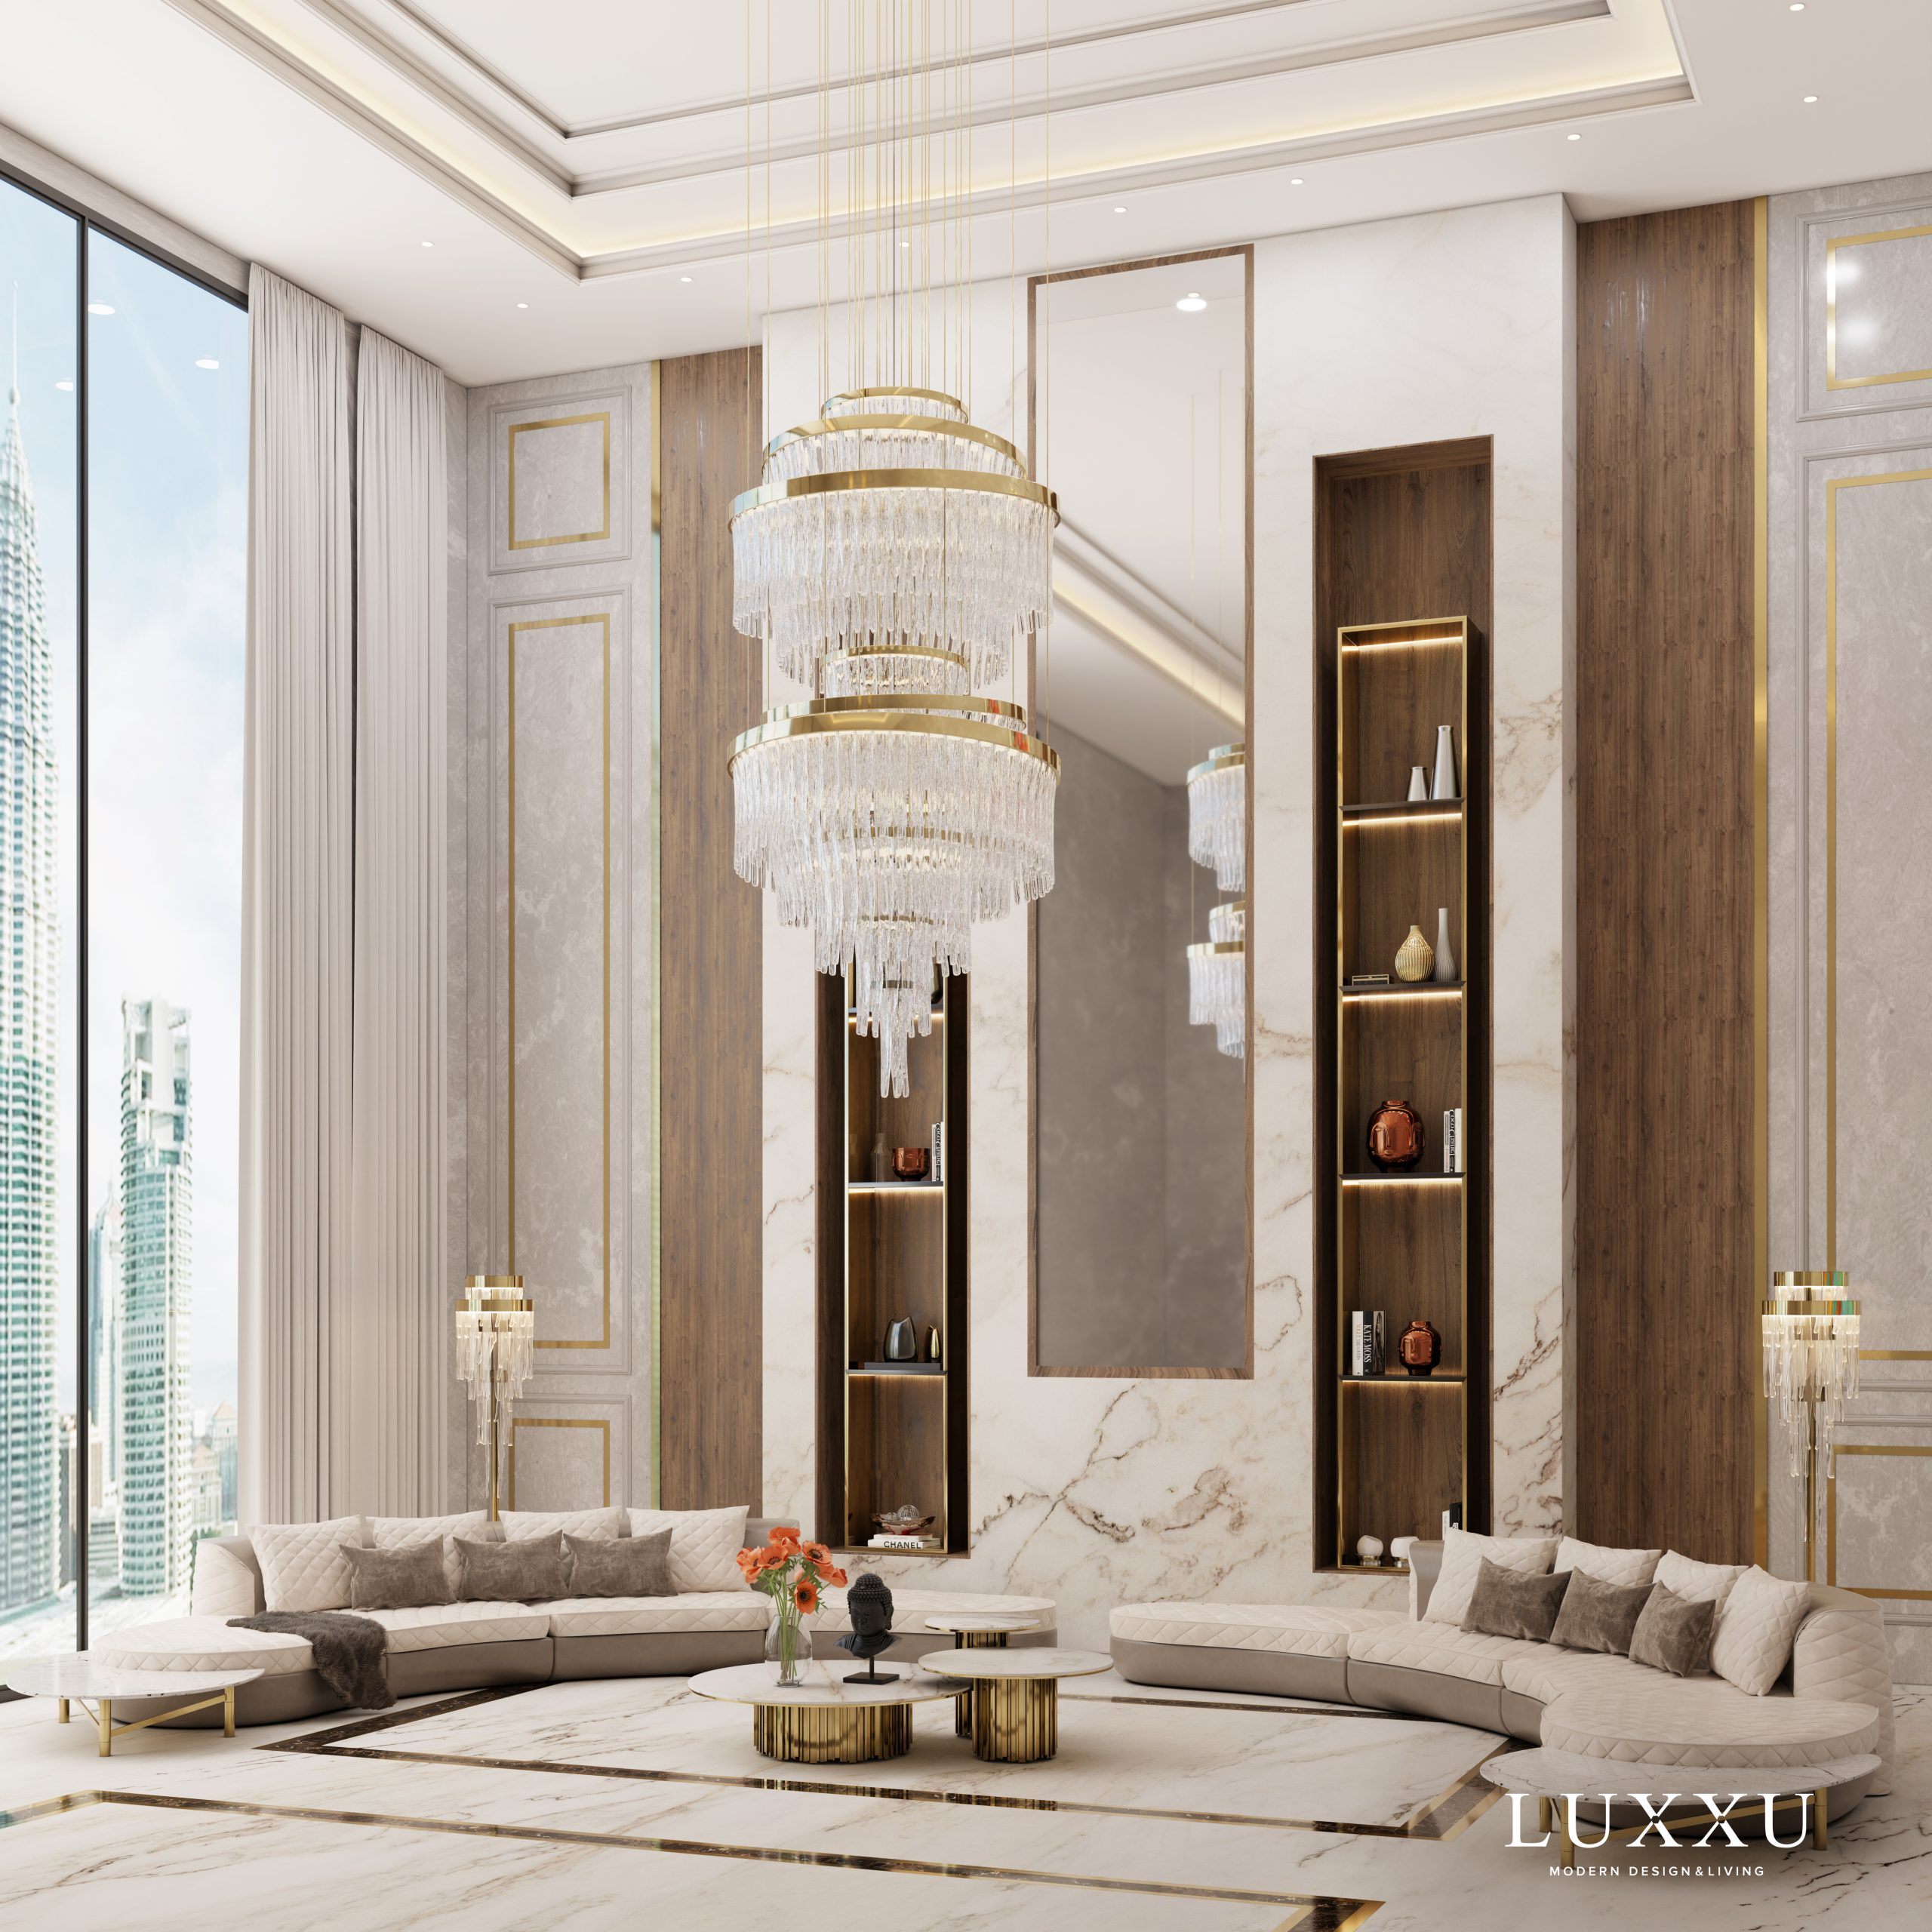 Condo In Kuala Lumpur with large crystal chandelier